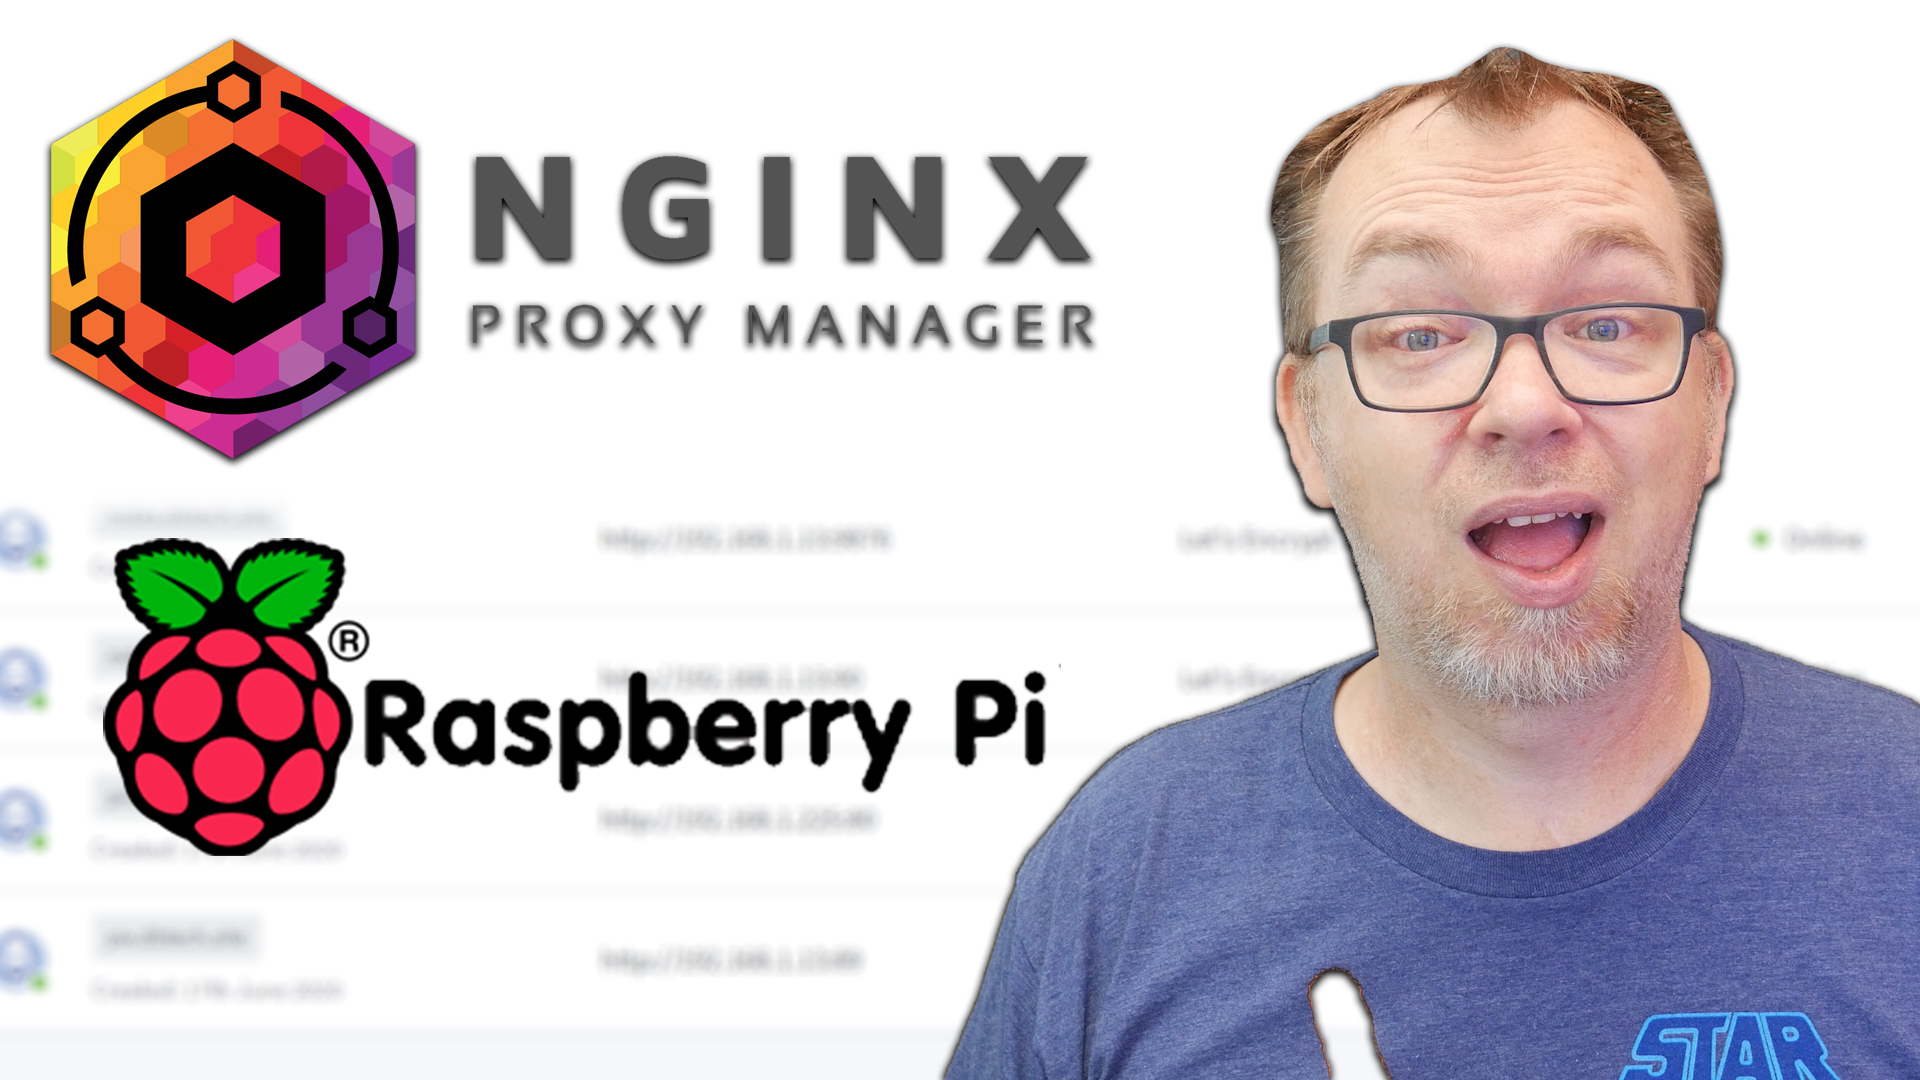 Install Nginx Proxy Manager on a Raspberry Pi 4